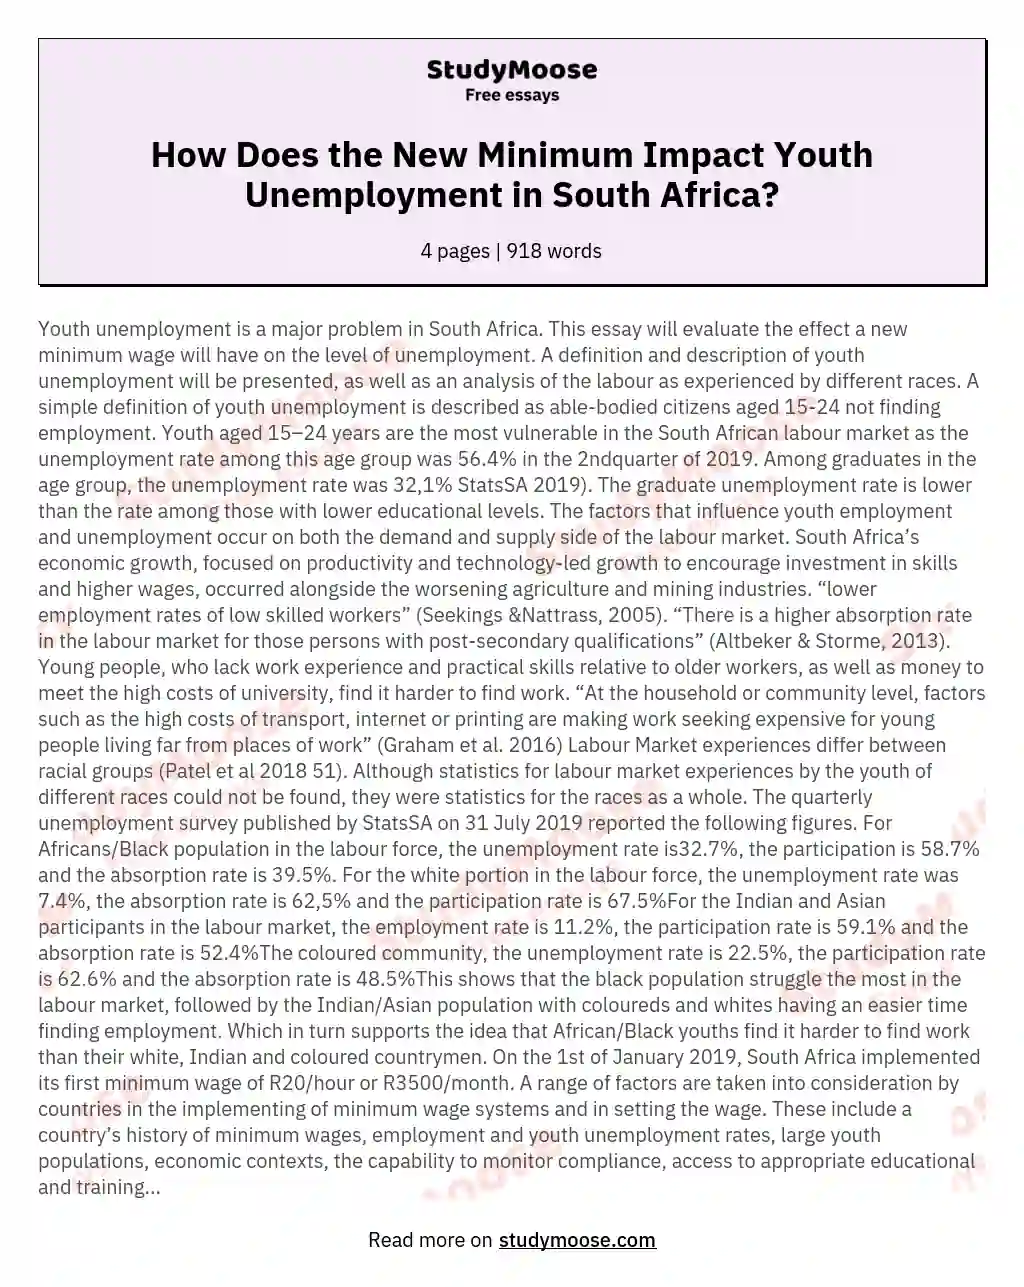 How Does the New Minimum Impact Youth Unemployment in South Africa? essay